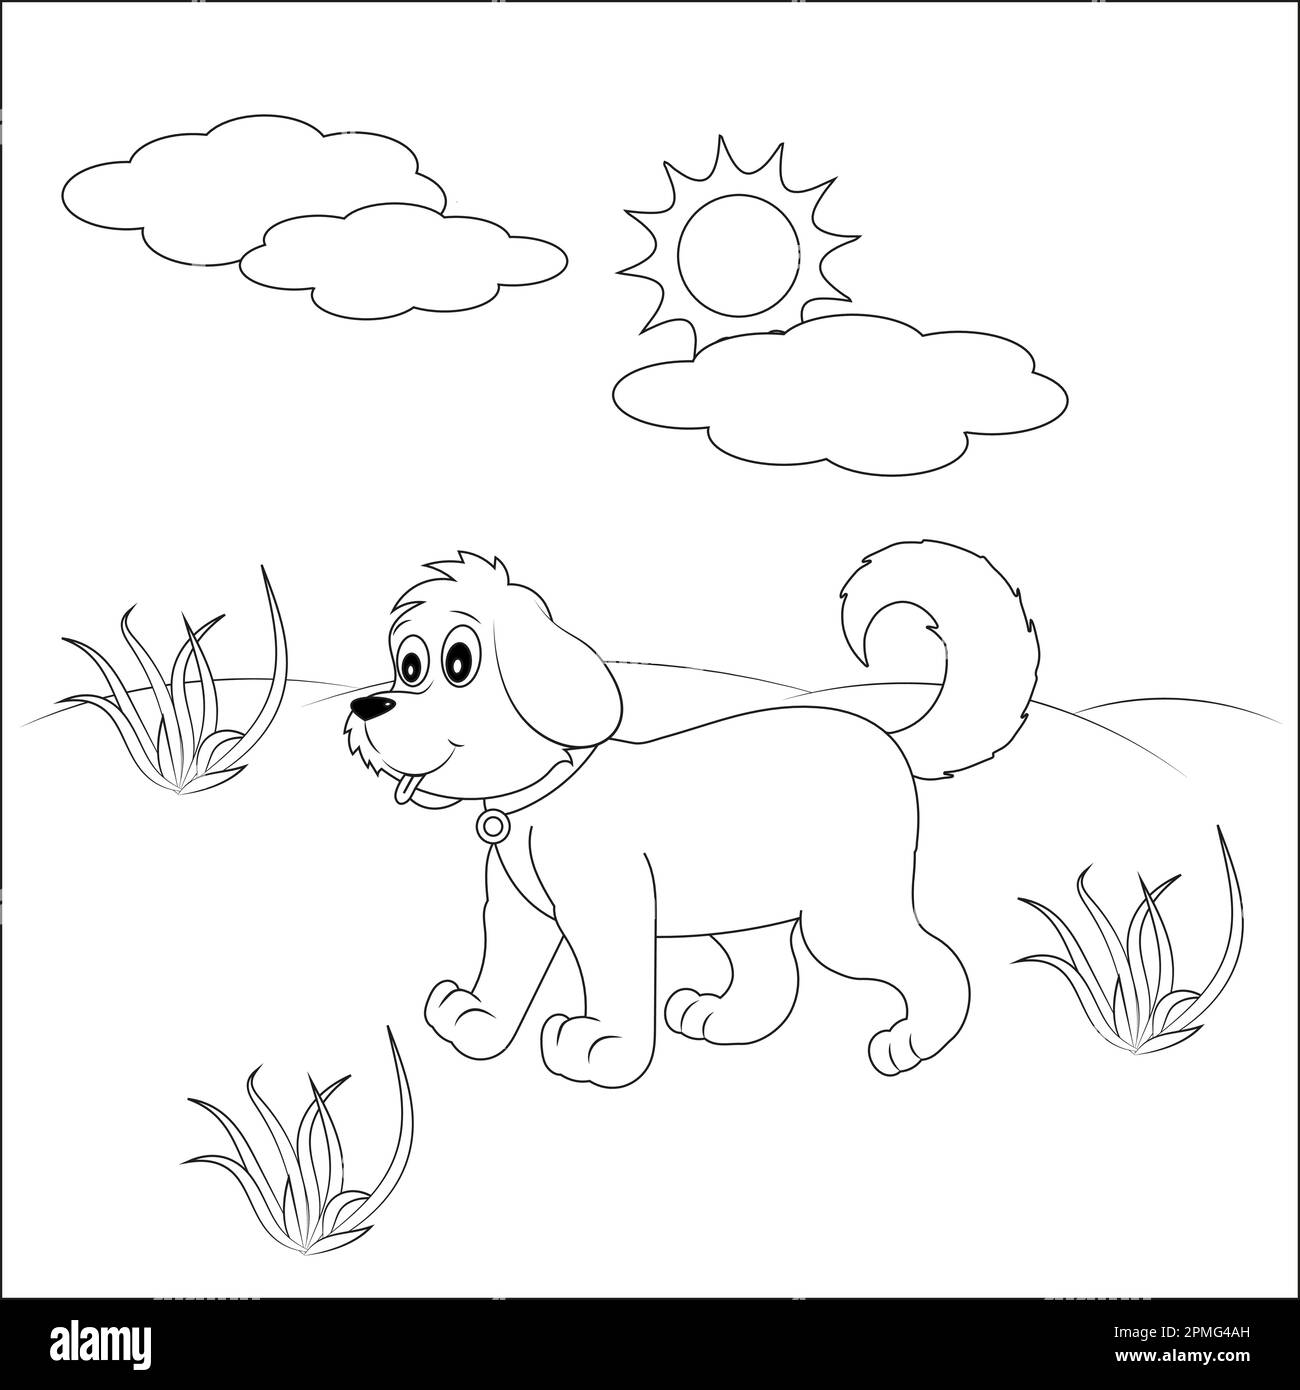 Cute dog cartoon character coloring page. Coloring book for kids Stock Vector